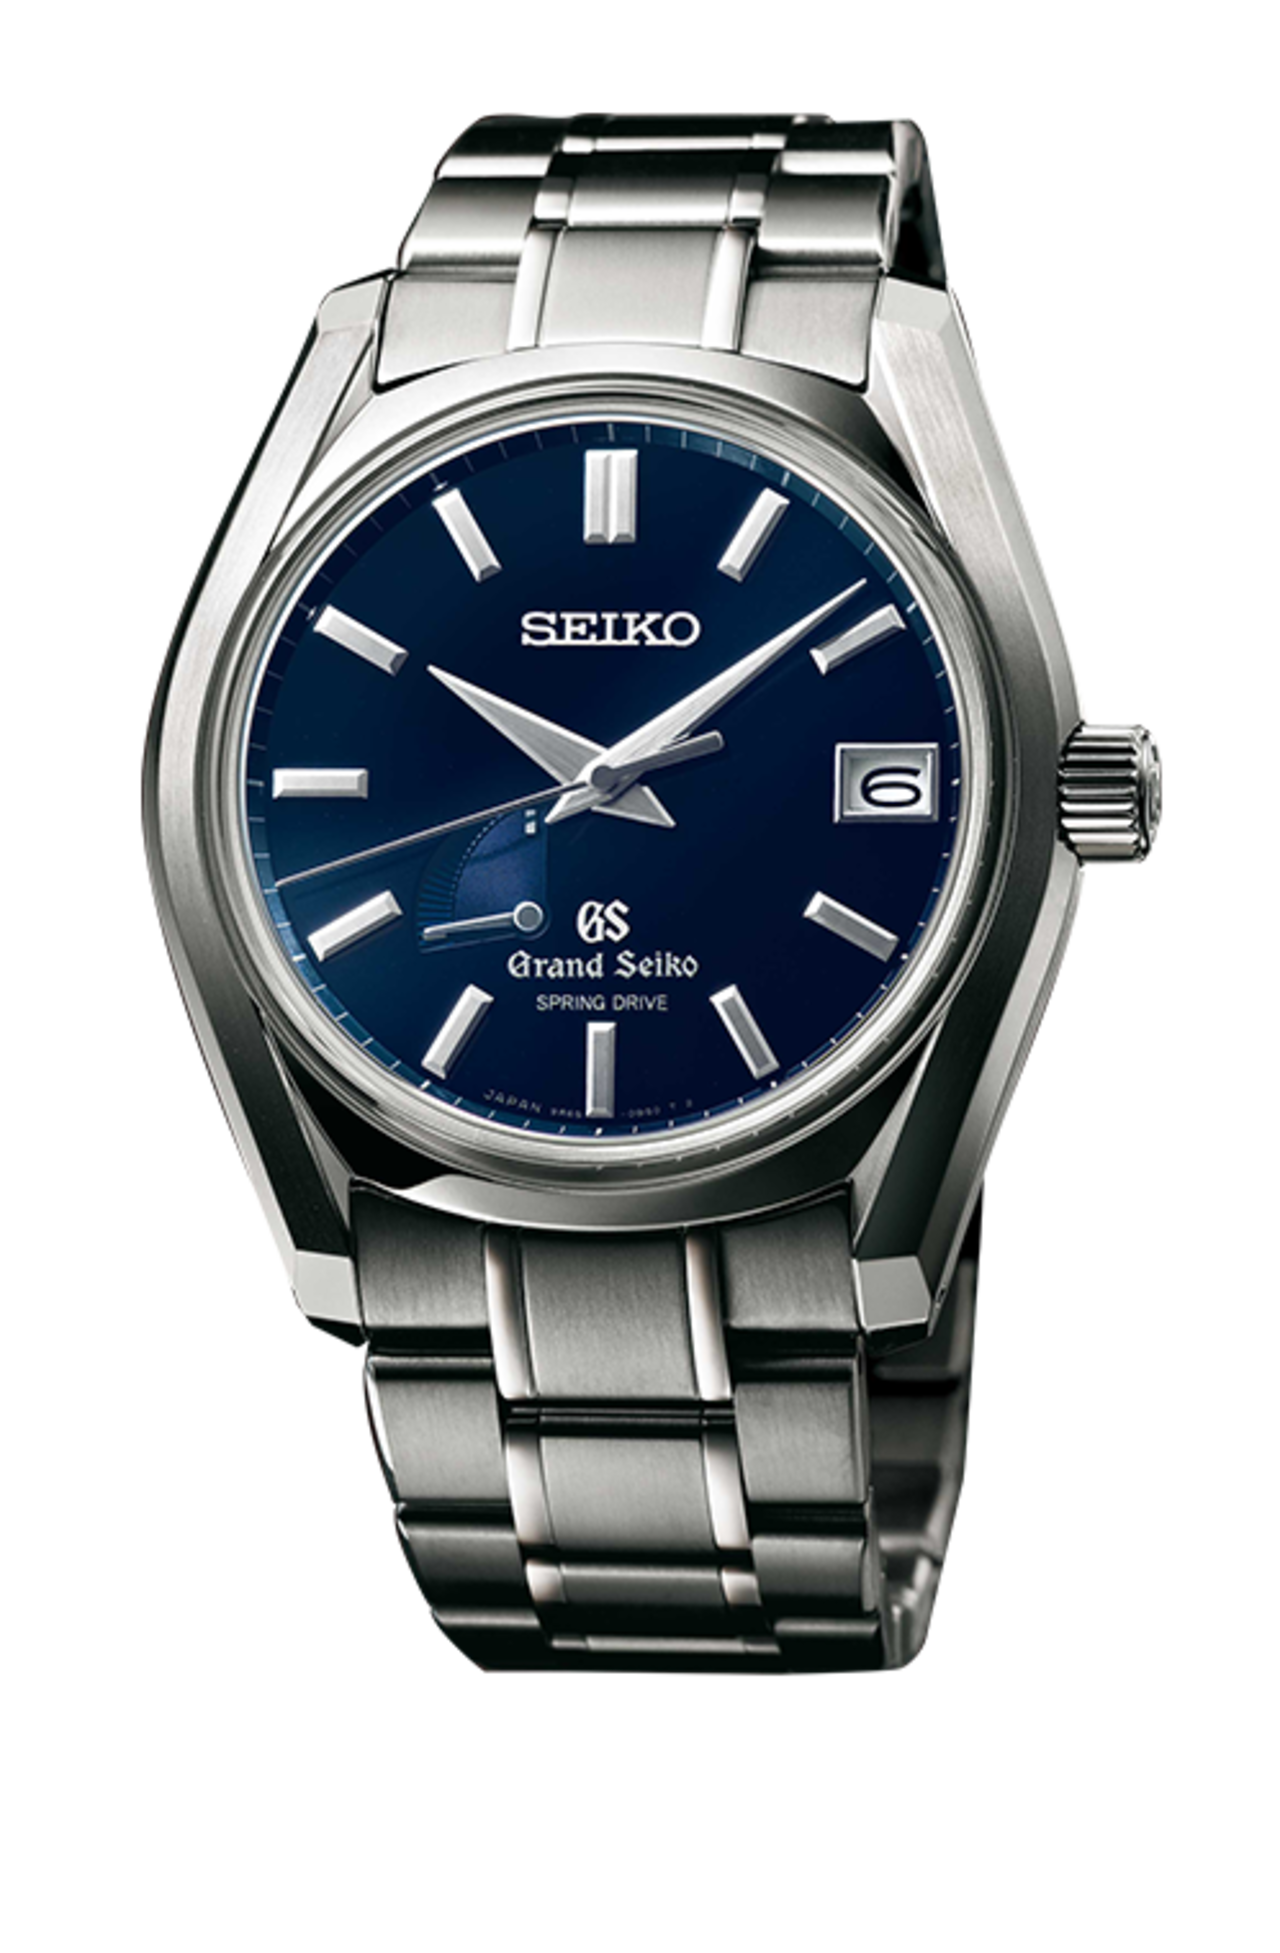 Seiko's pioneering spring drive provided 72 hours of reserve power, then 1998's Grand Seiko line reminded everyone that not all Japanese watches are cheap digitals.